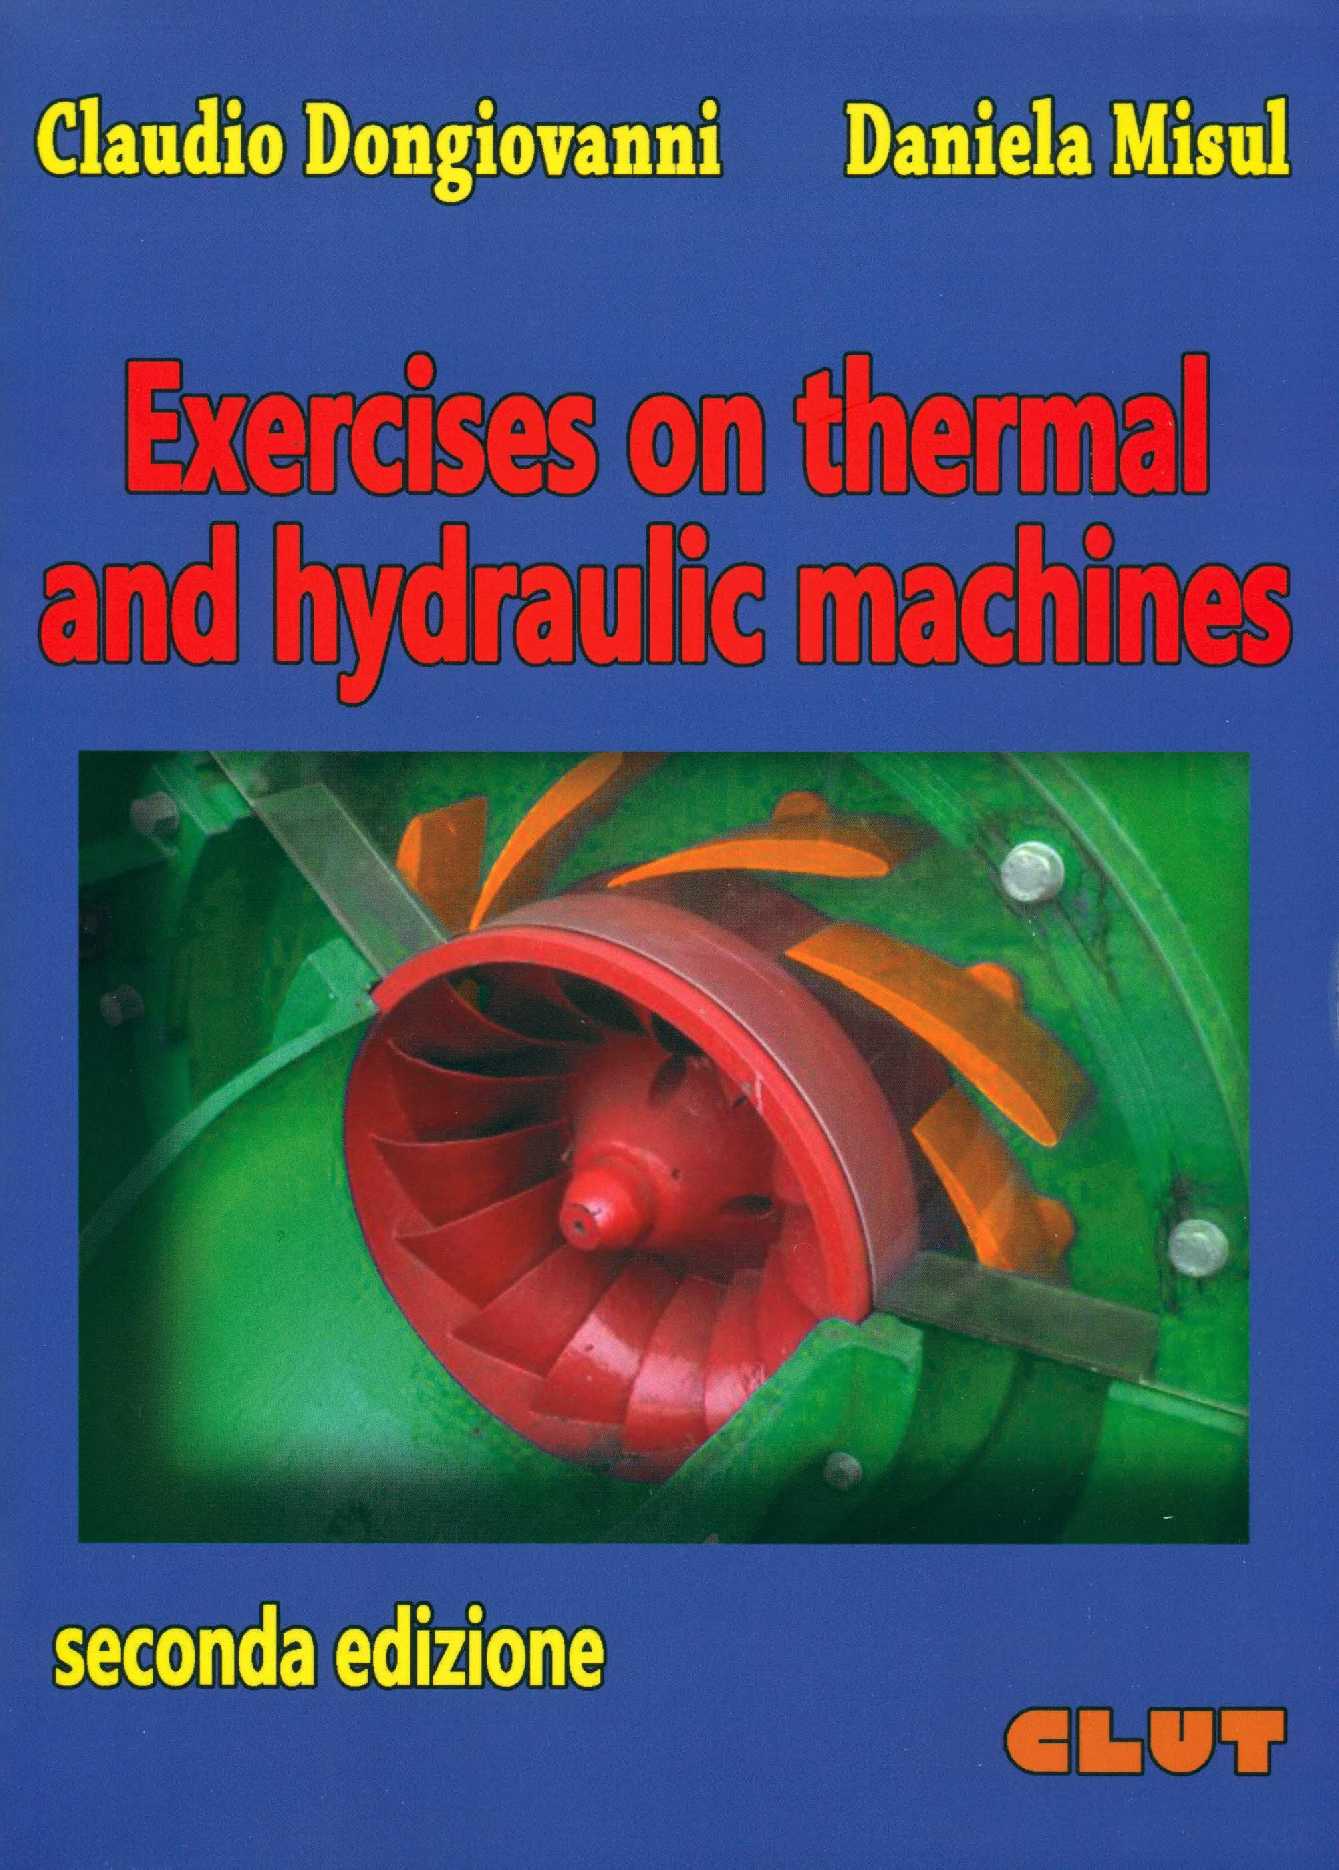 EXERCISES ON THERMAL AND HYDRAULIC MACHINES - II edition